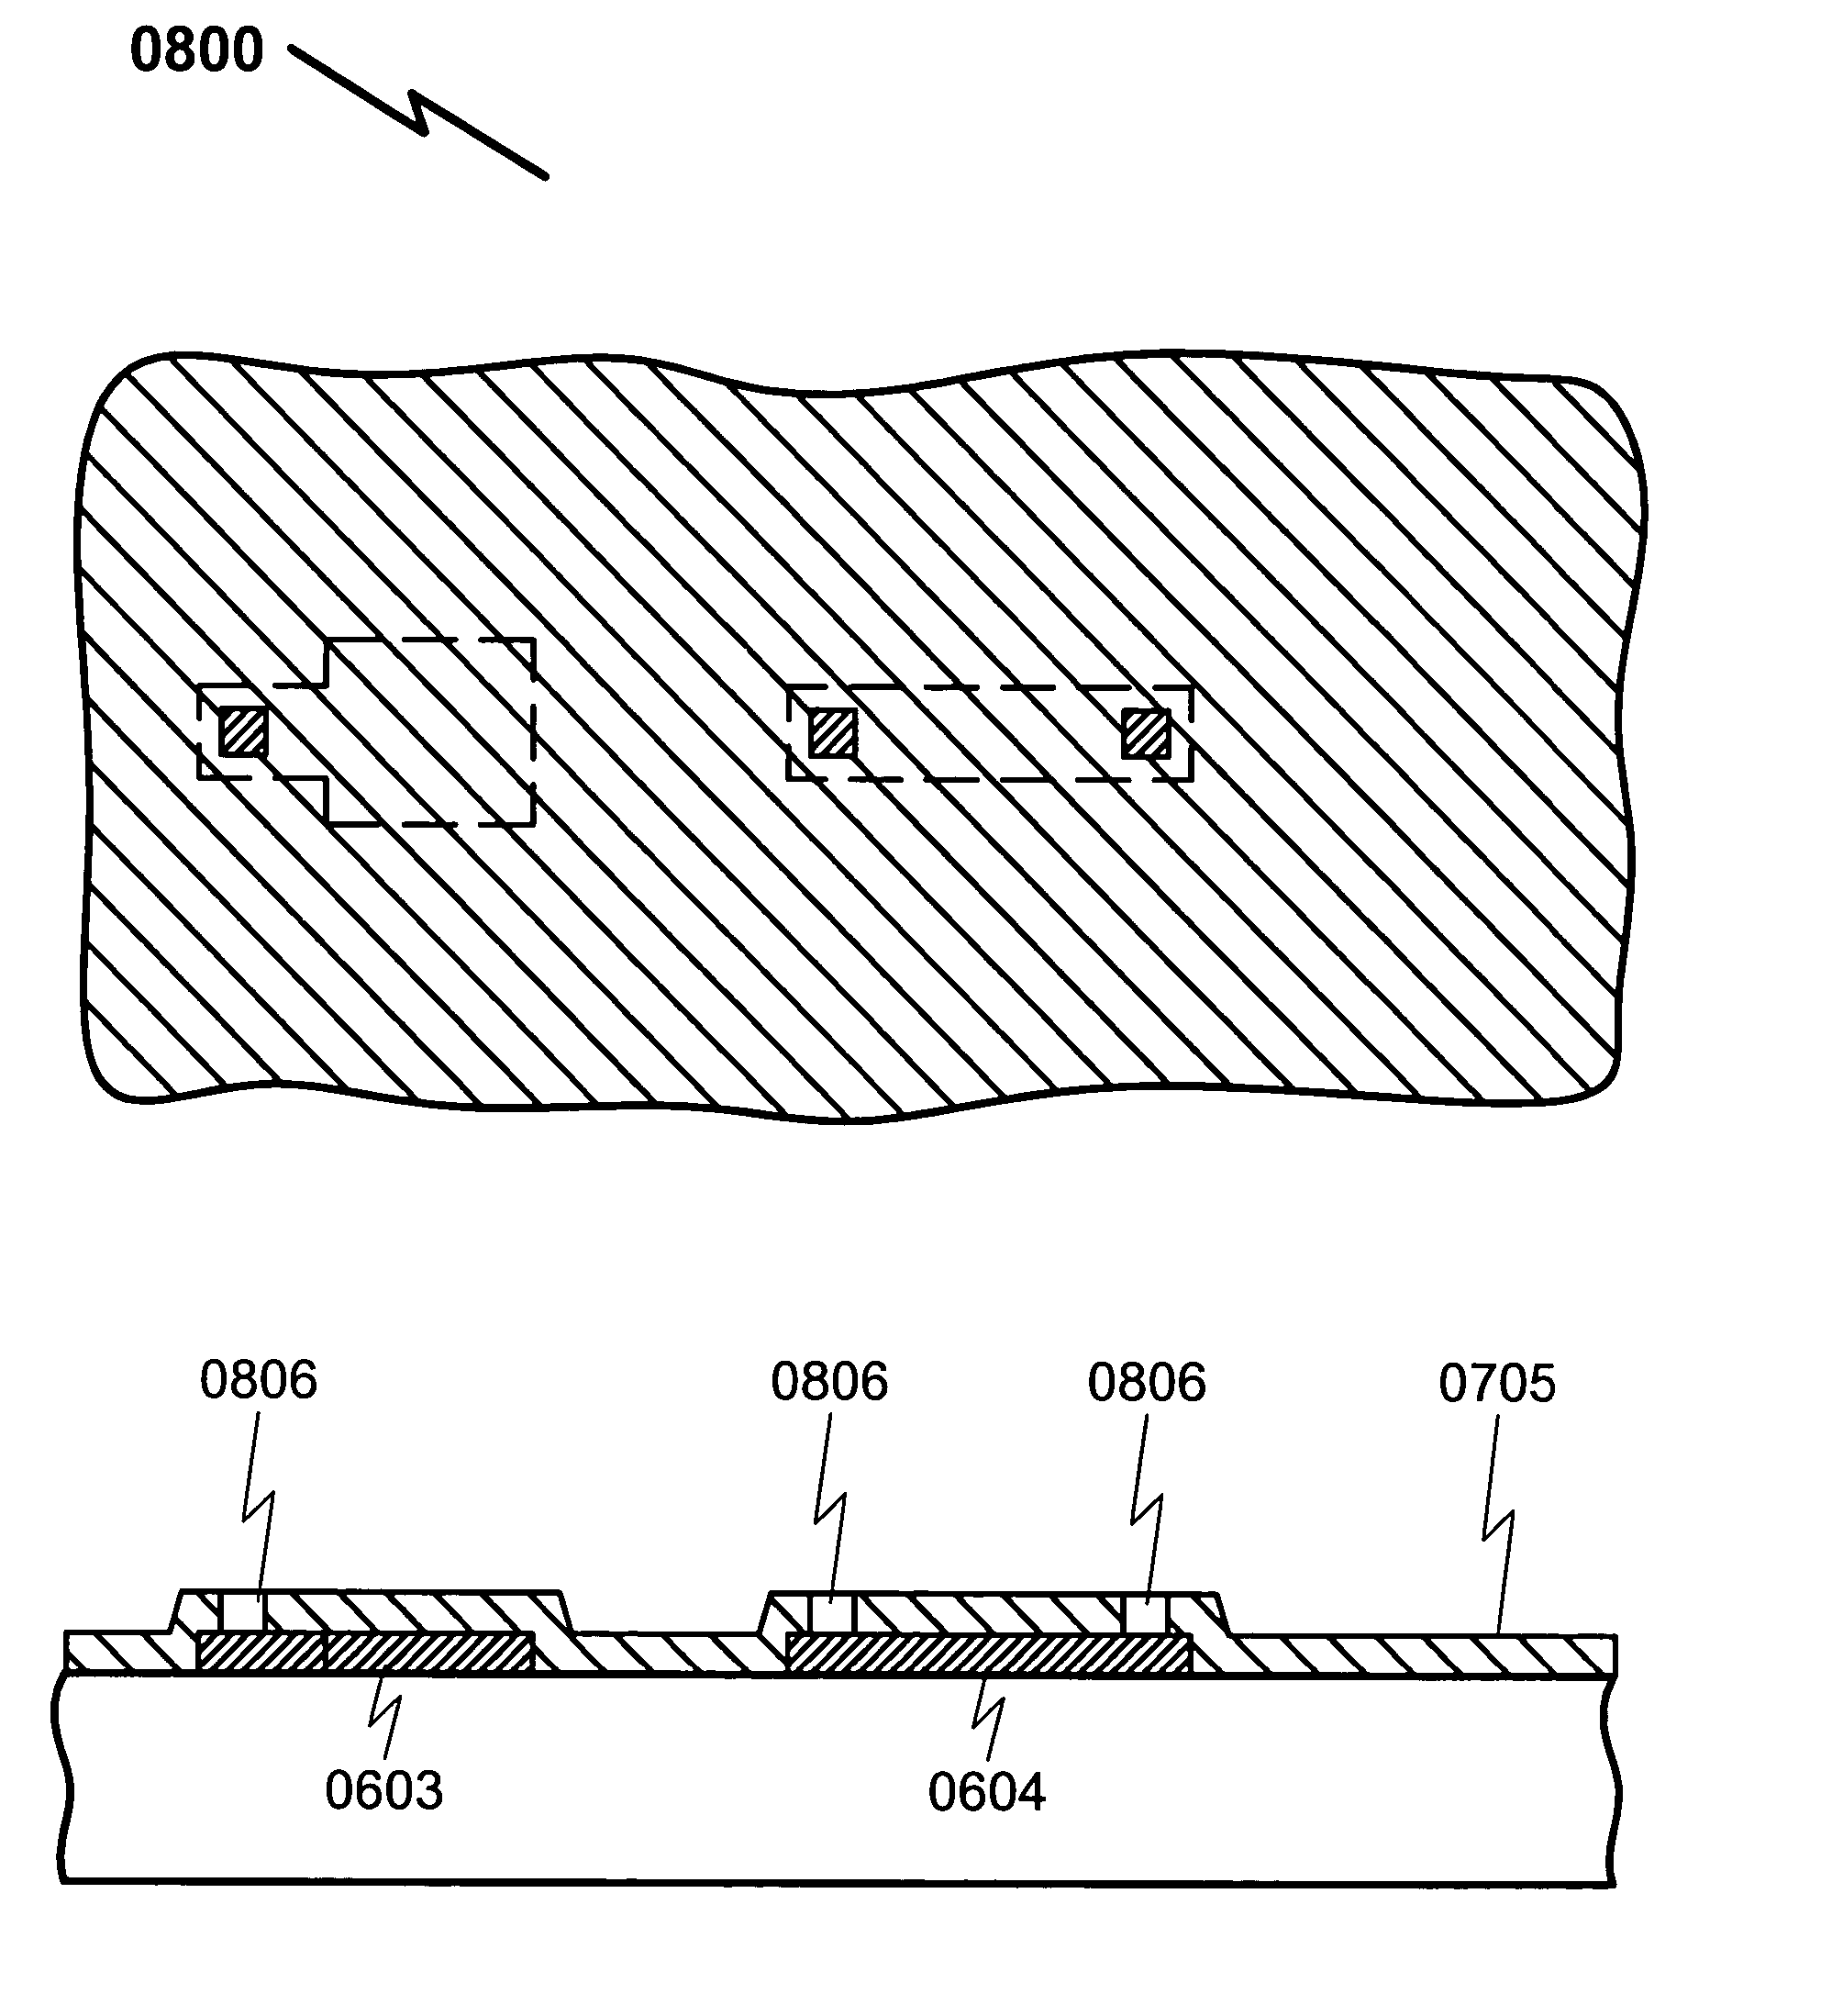 Integrated thin film capacitor/inductor/interconnect system and method